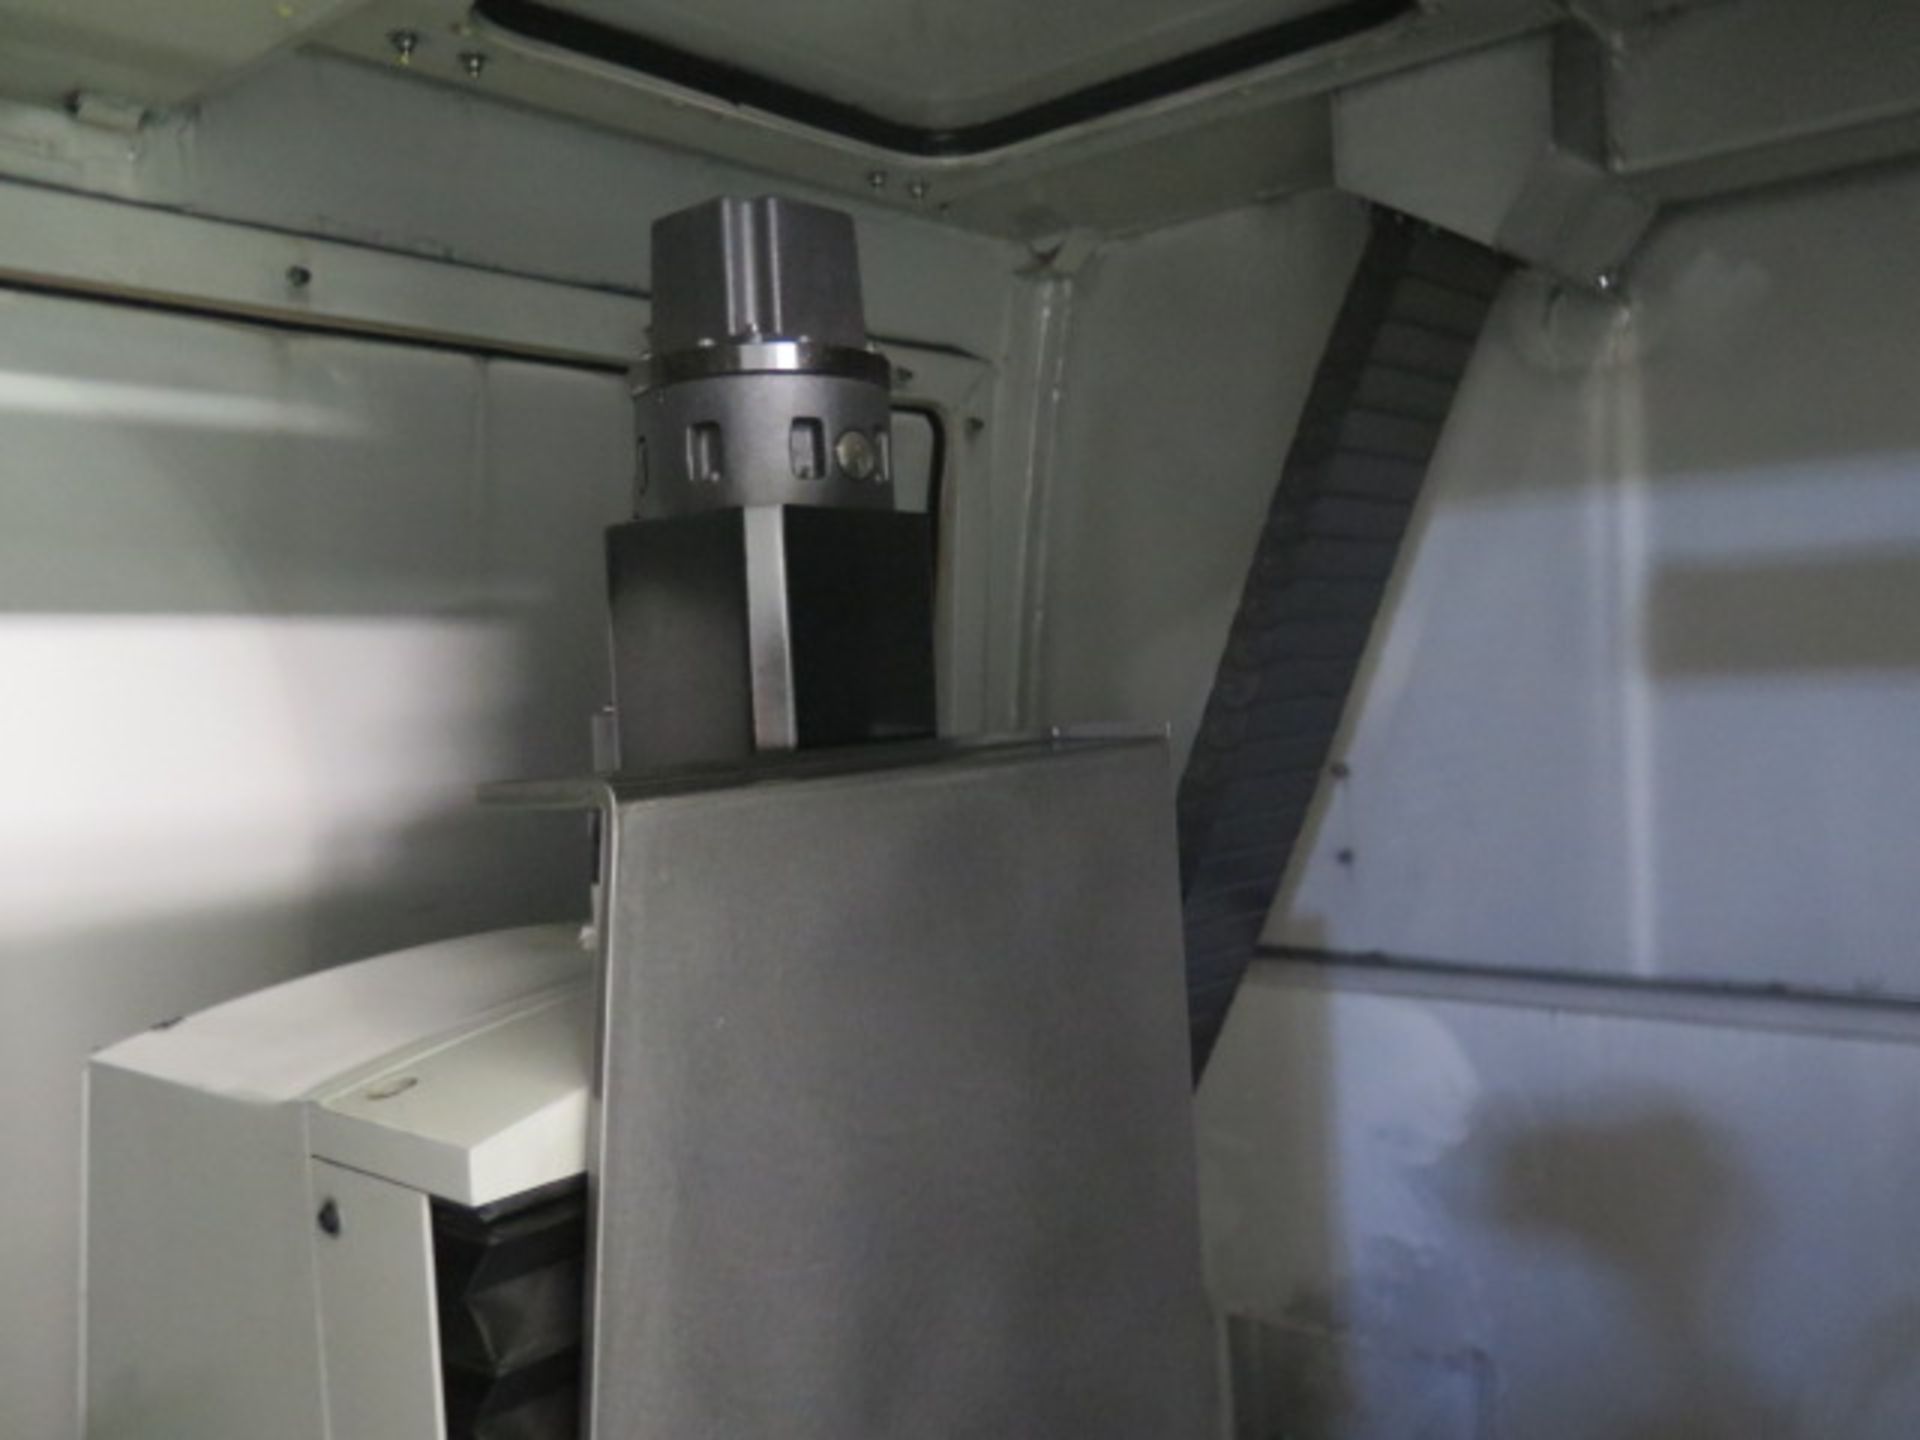 2012 Anca “Fastgrind” 7-Axis CNC Tool and Cutter Grinder s/n 750431 w/ Anca PC Controls, SOLD AS IS - Image 6 of 18